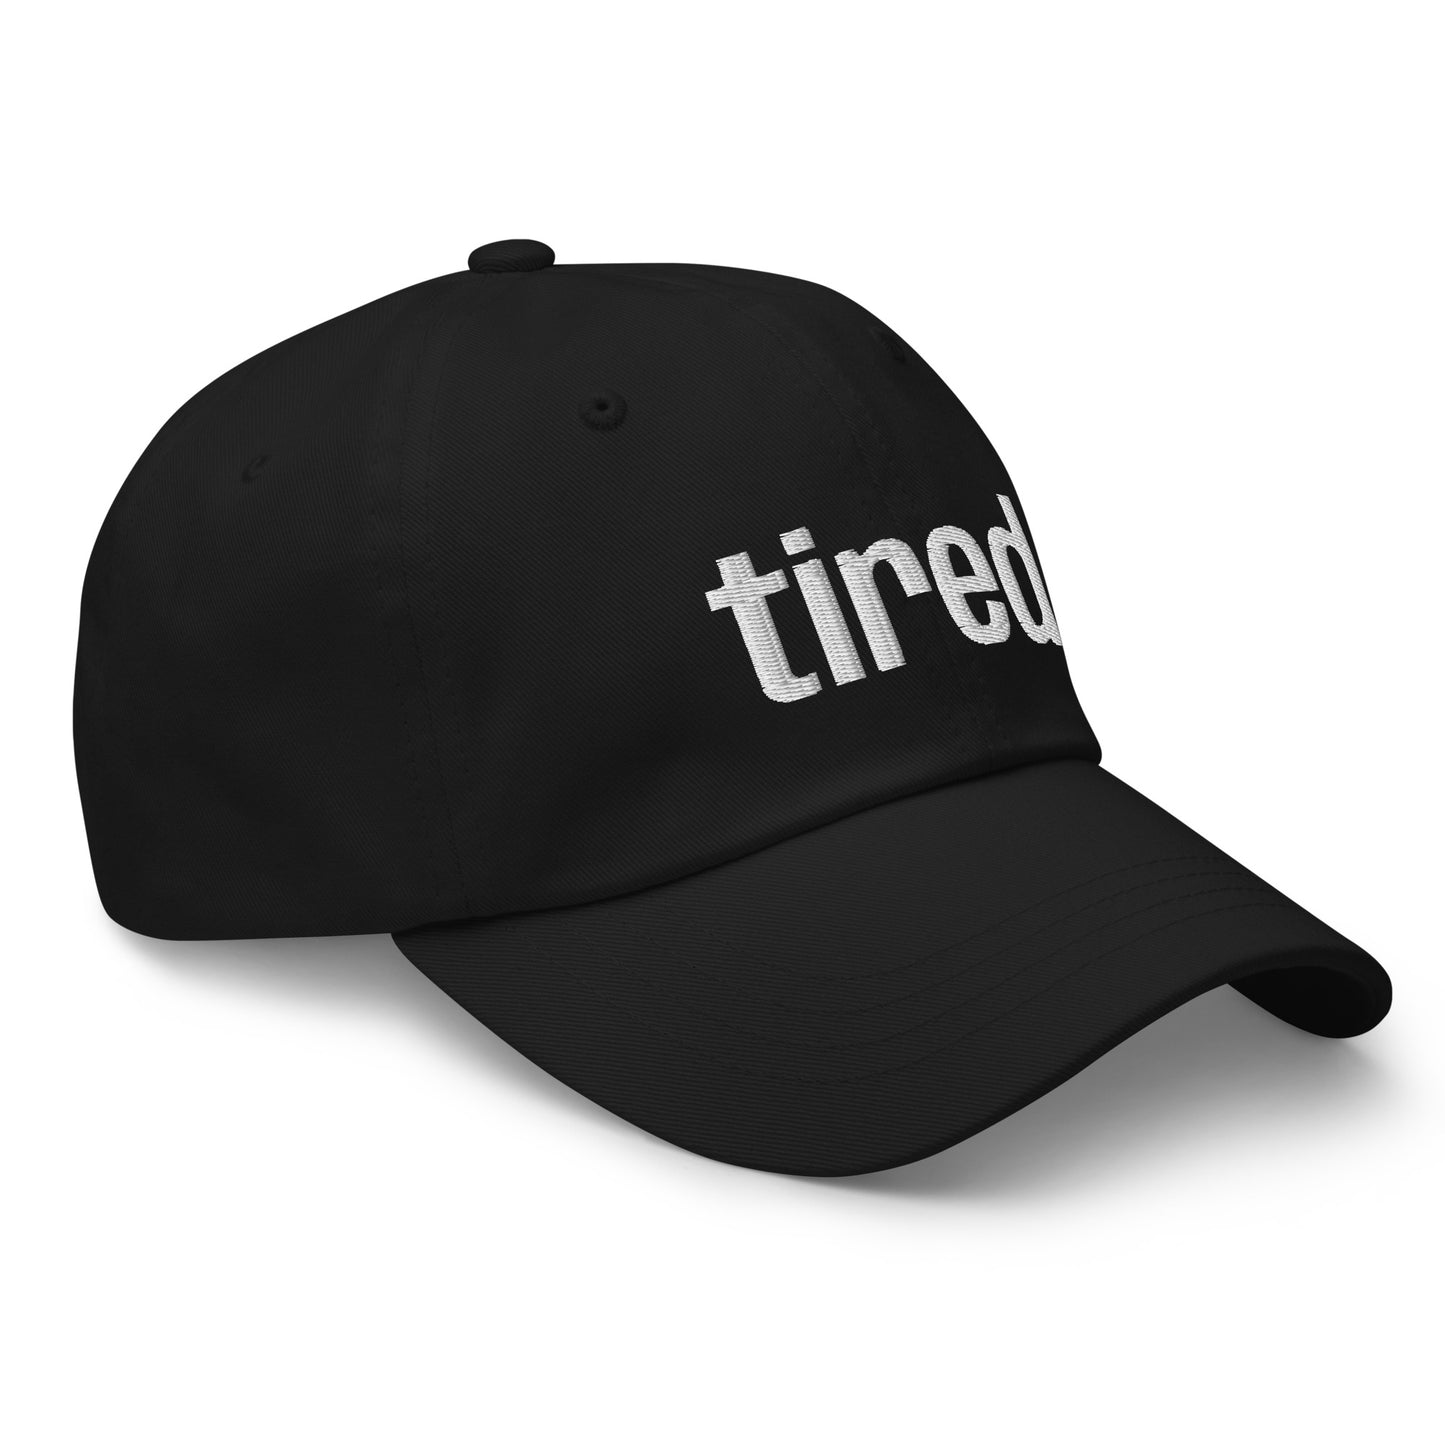 Tired Hat